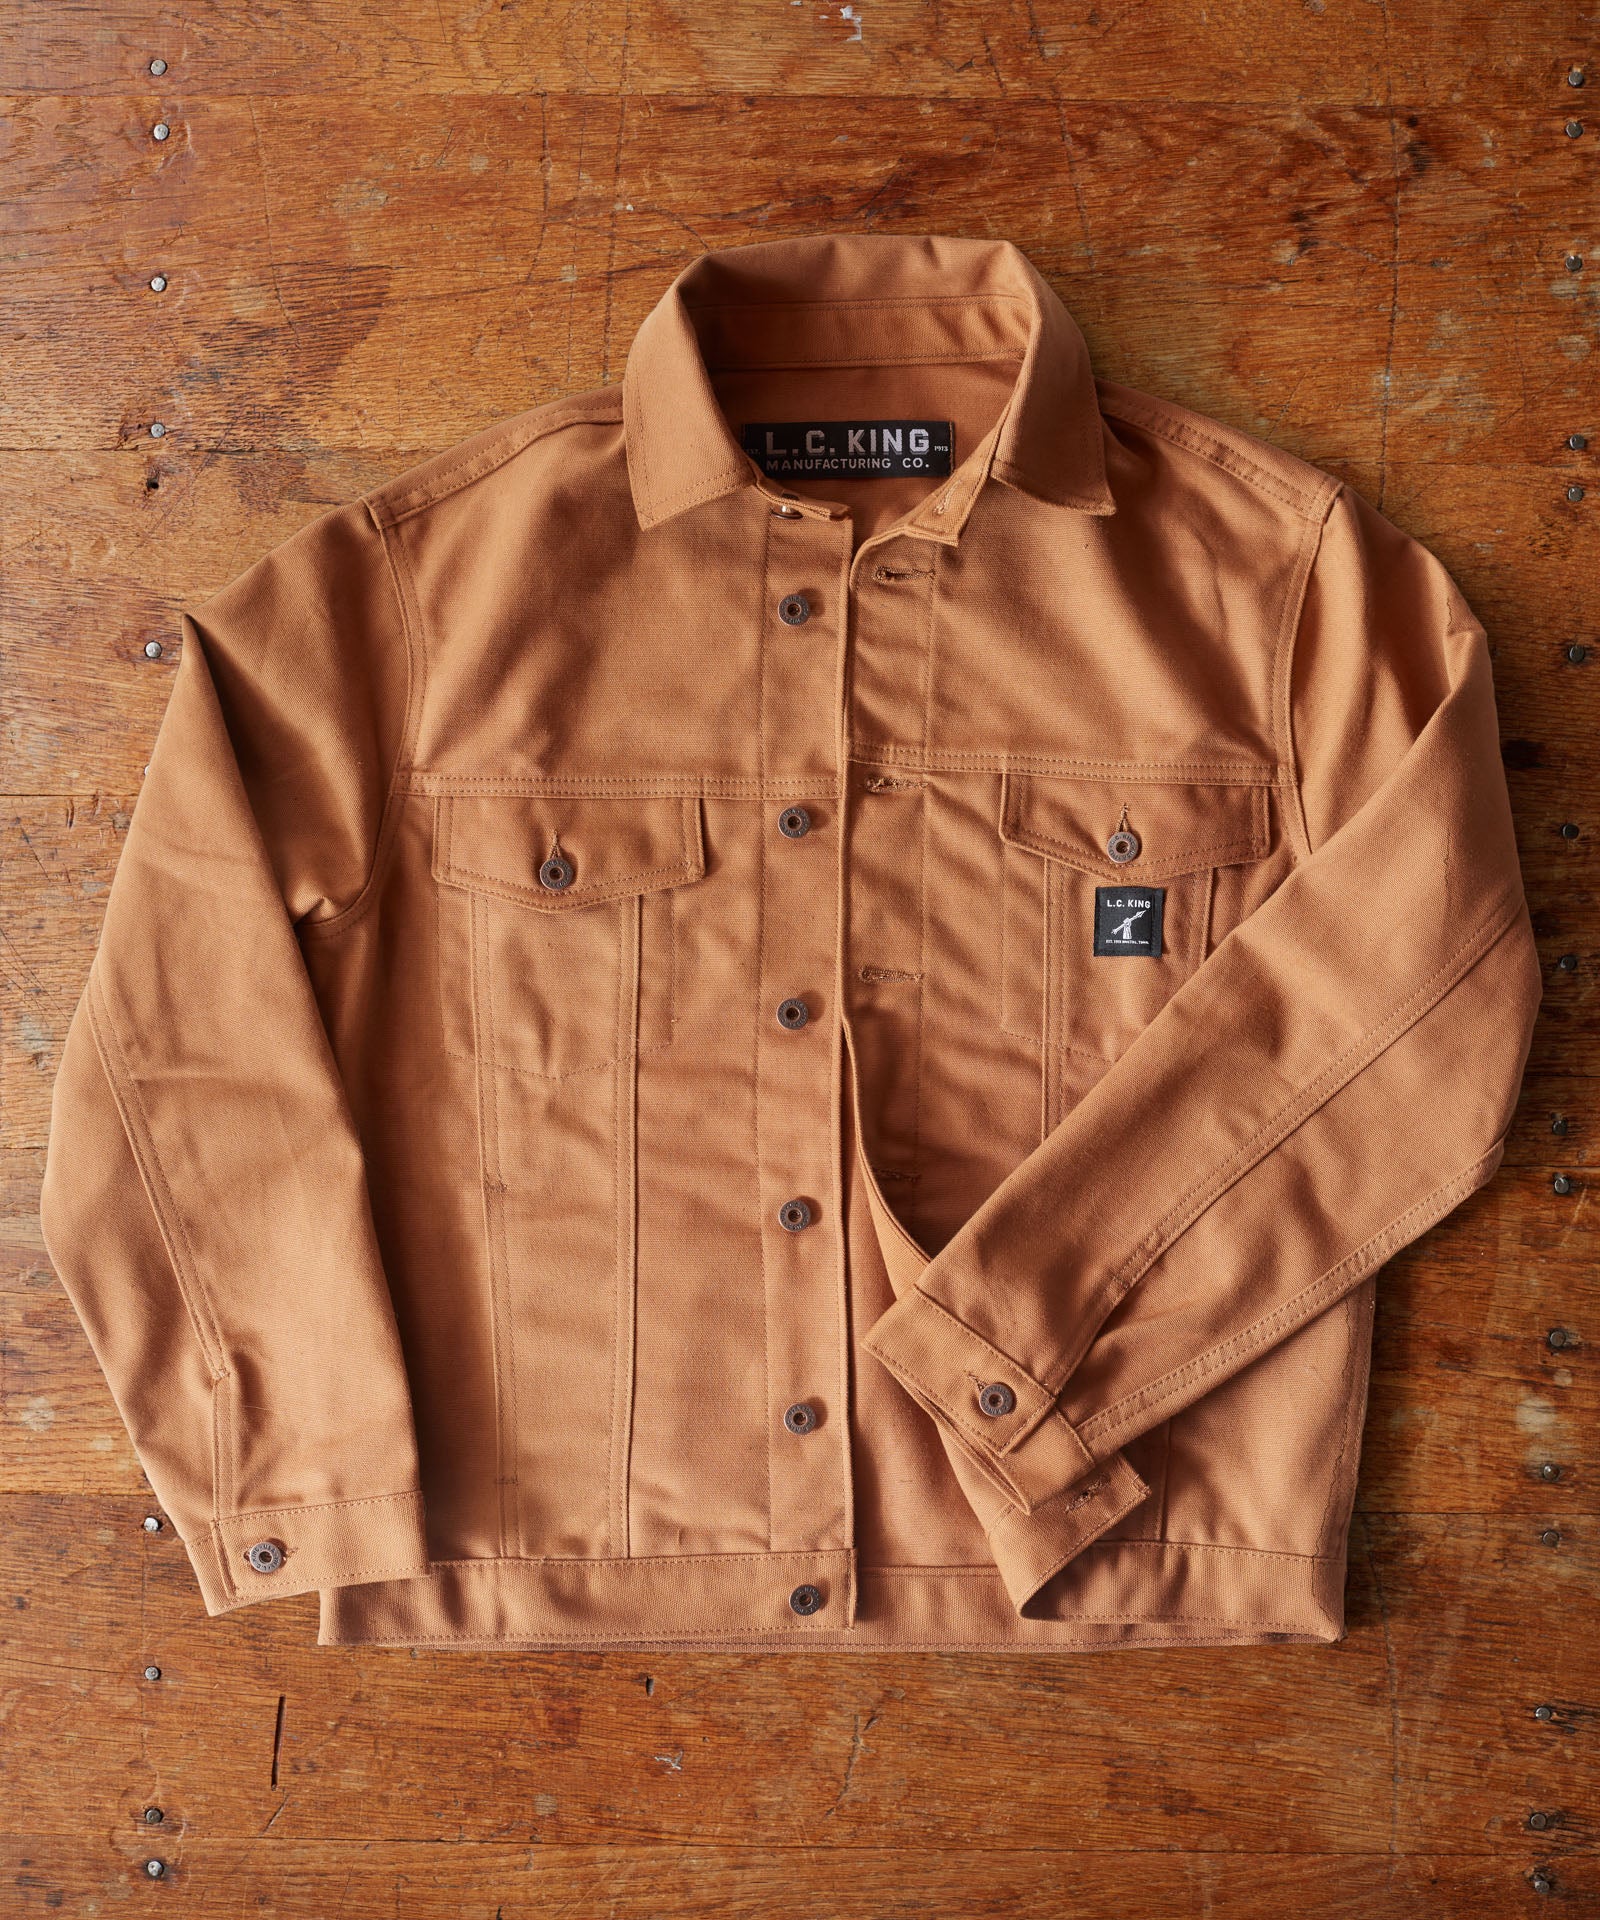 LC King Bristol Jean Jacket in Brown Duck - Made in the USA – LC King Mfg